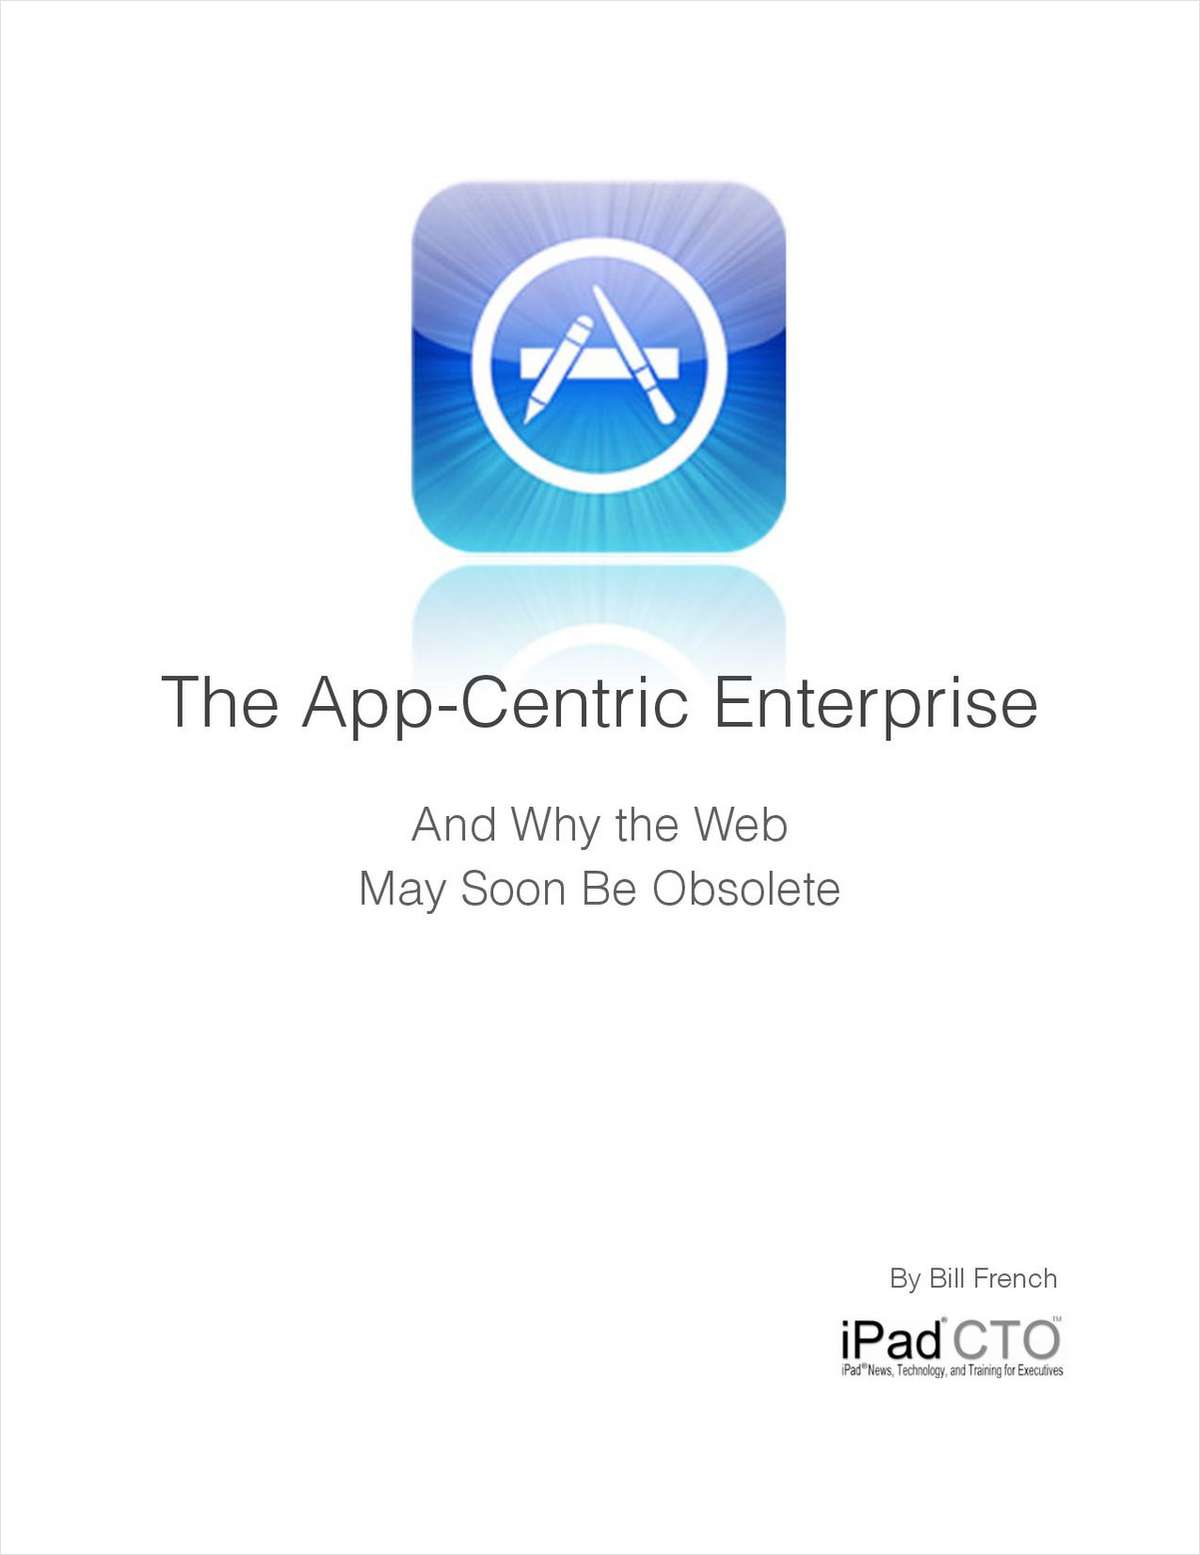 The App-Centric Enterprise and Why the Web May Soon Be Obsolete